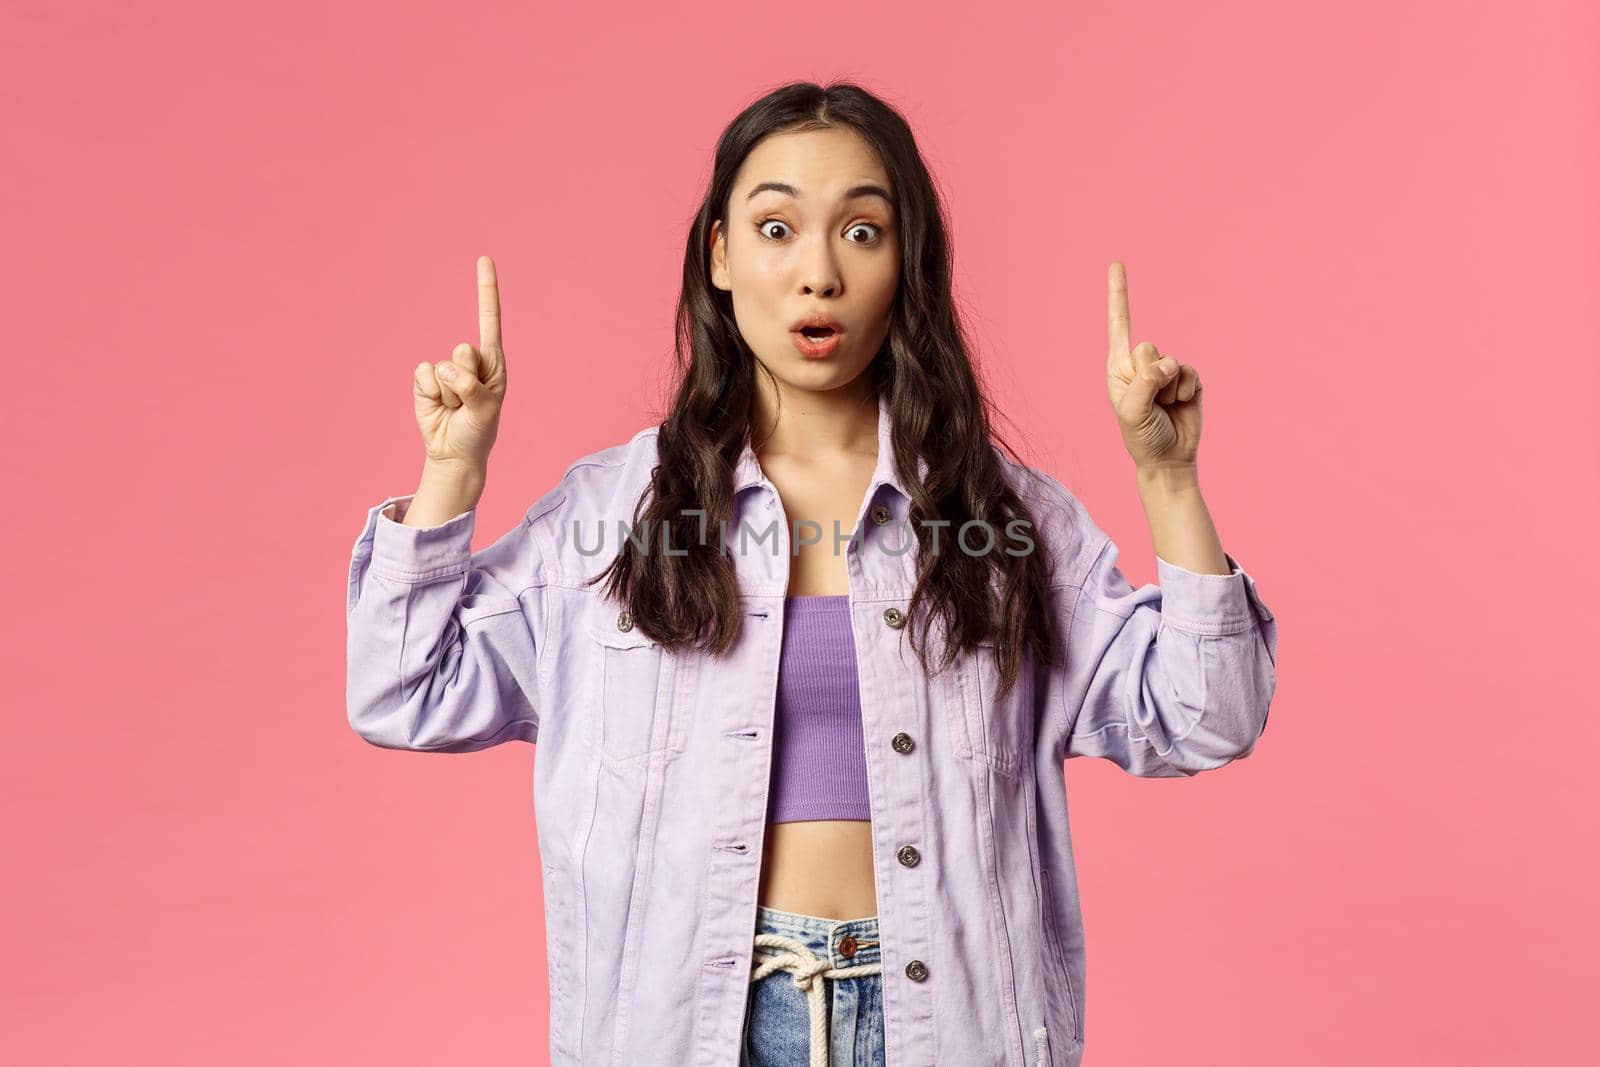 Portrait of impressed and surprised beautiful young girl in denim jacket, crop-top, pointing fingers up and staring at camera startled, gasping amazed, showing something cool, pink background.